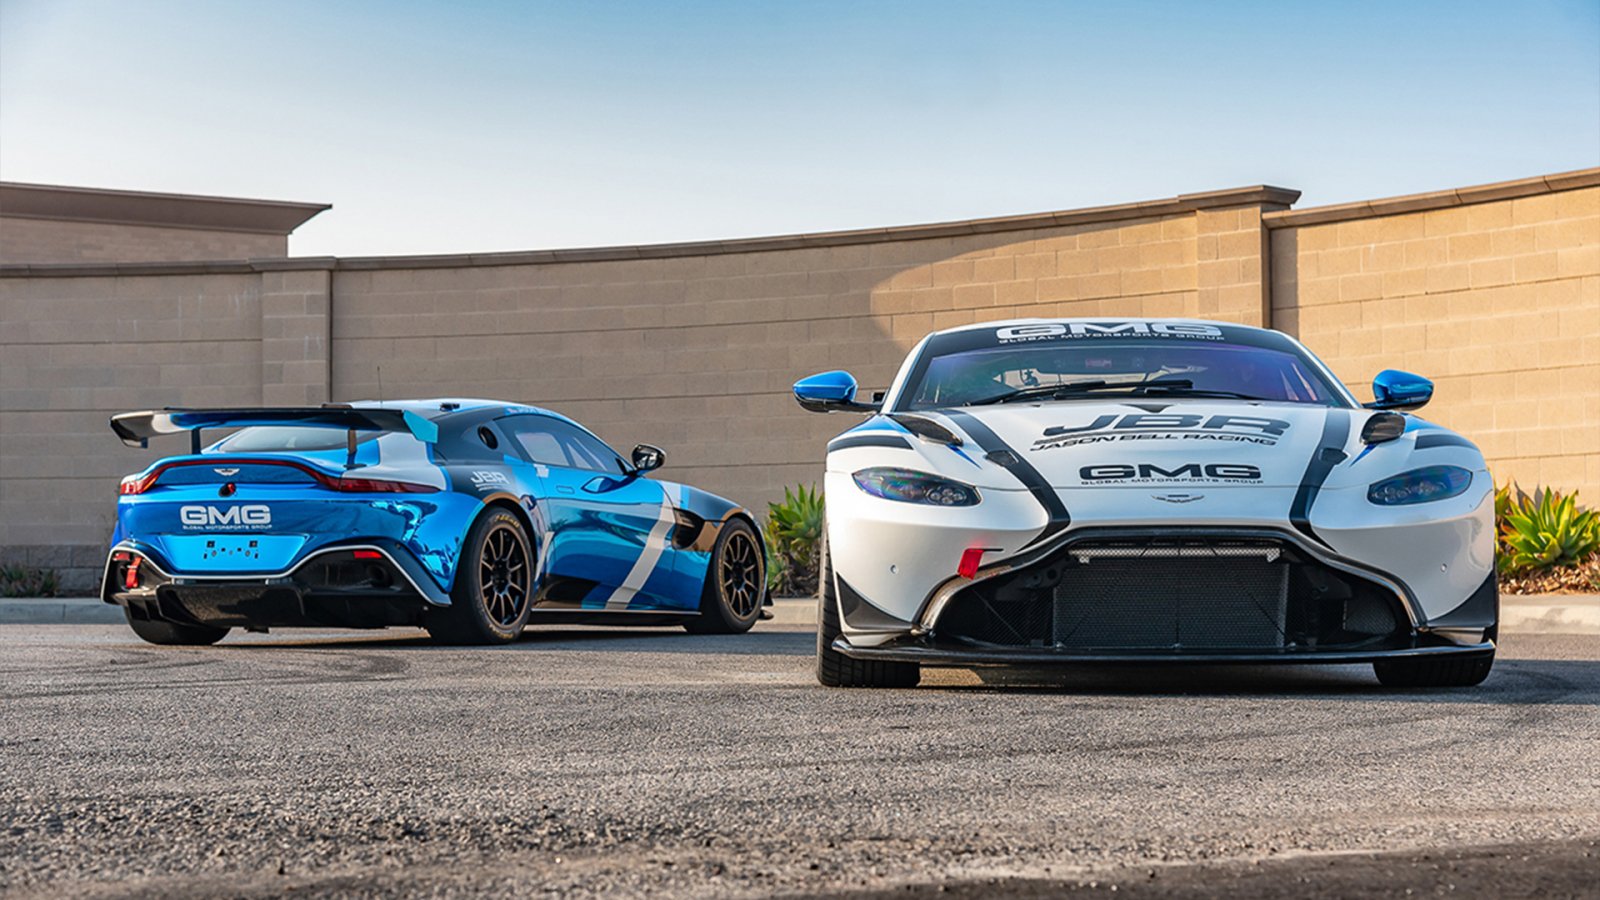 Jason Bell Set for First Event of 2021 with GMG Racing and Aston Martin